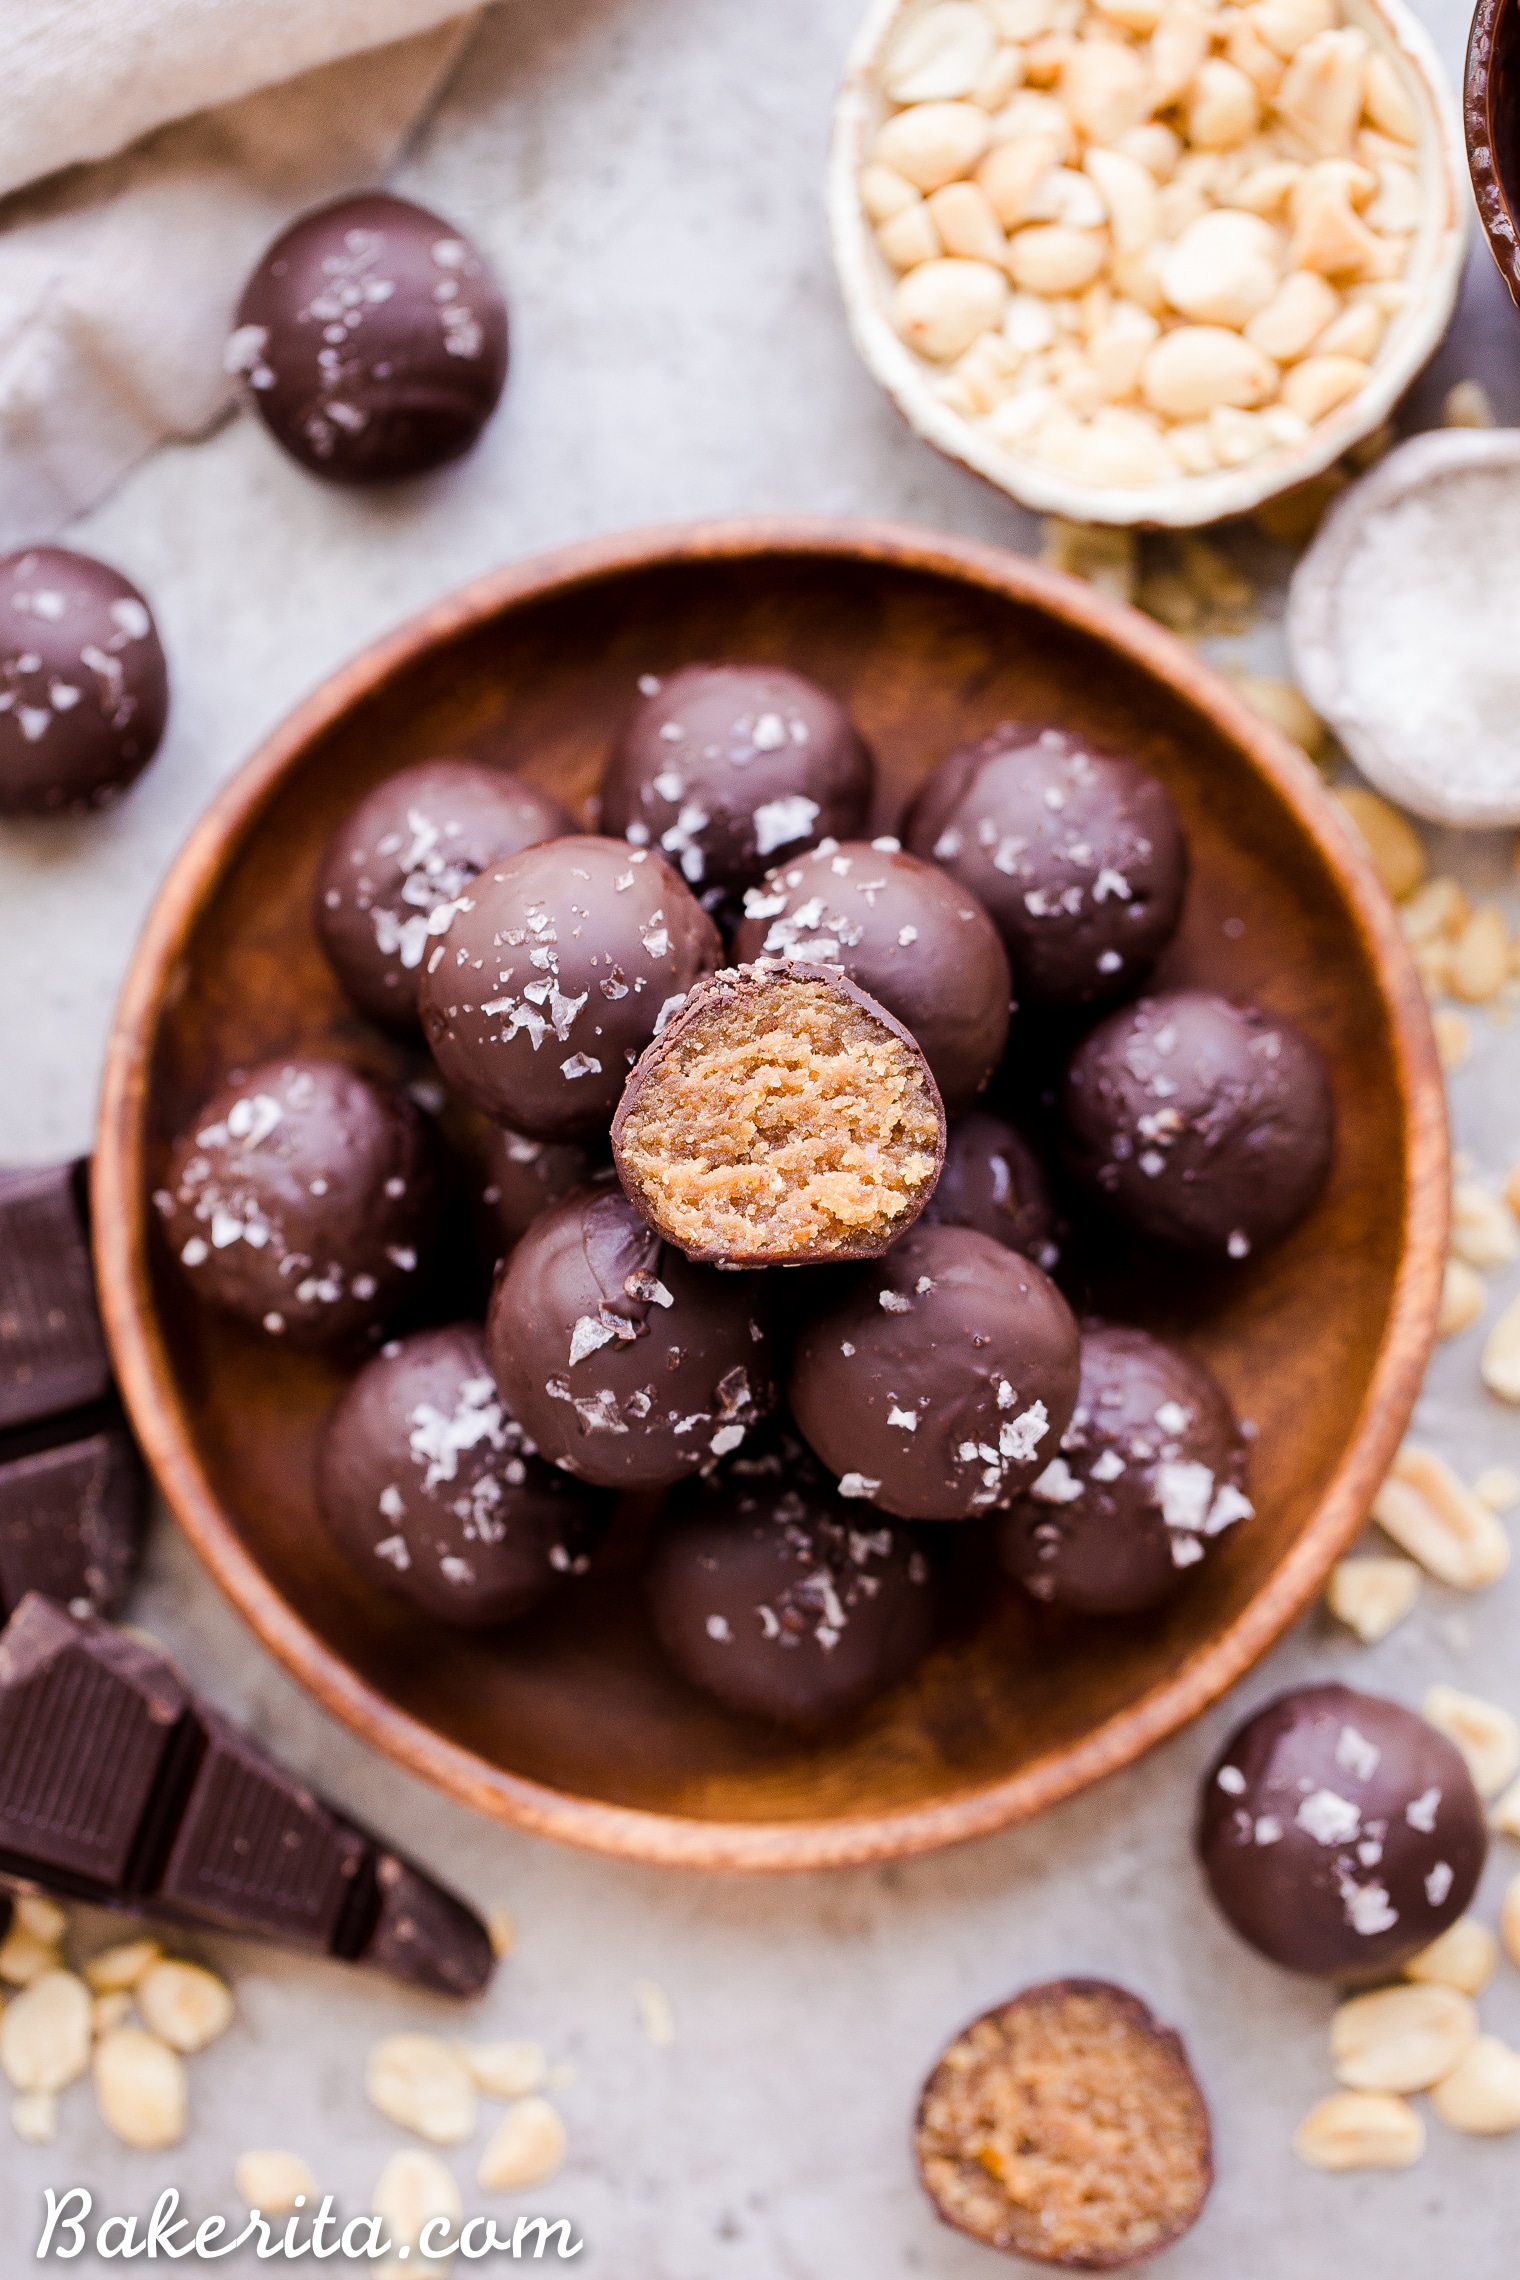 These Chocolate Peanut Butter Truffles are decadent, delicious, and made with just FOUR super simple + clean ingredients. They're gluten-free, vegan and sweetened with dates - they can also easily be made paleo by using a different nut butter! These truffles are sure to satisfy your chocolate peanut butter candy cravings.